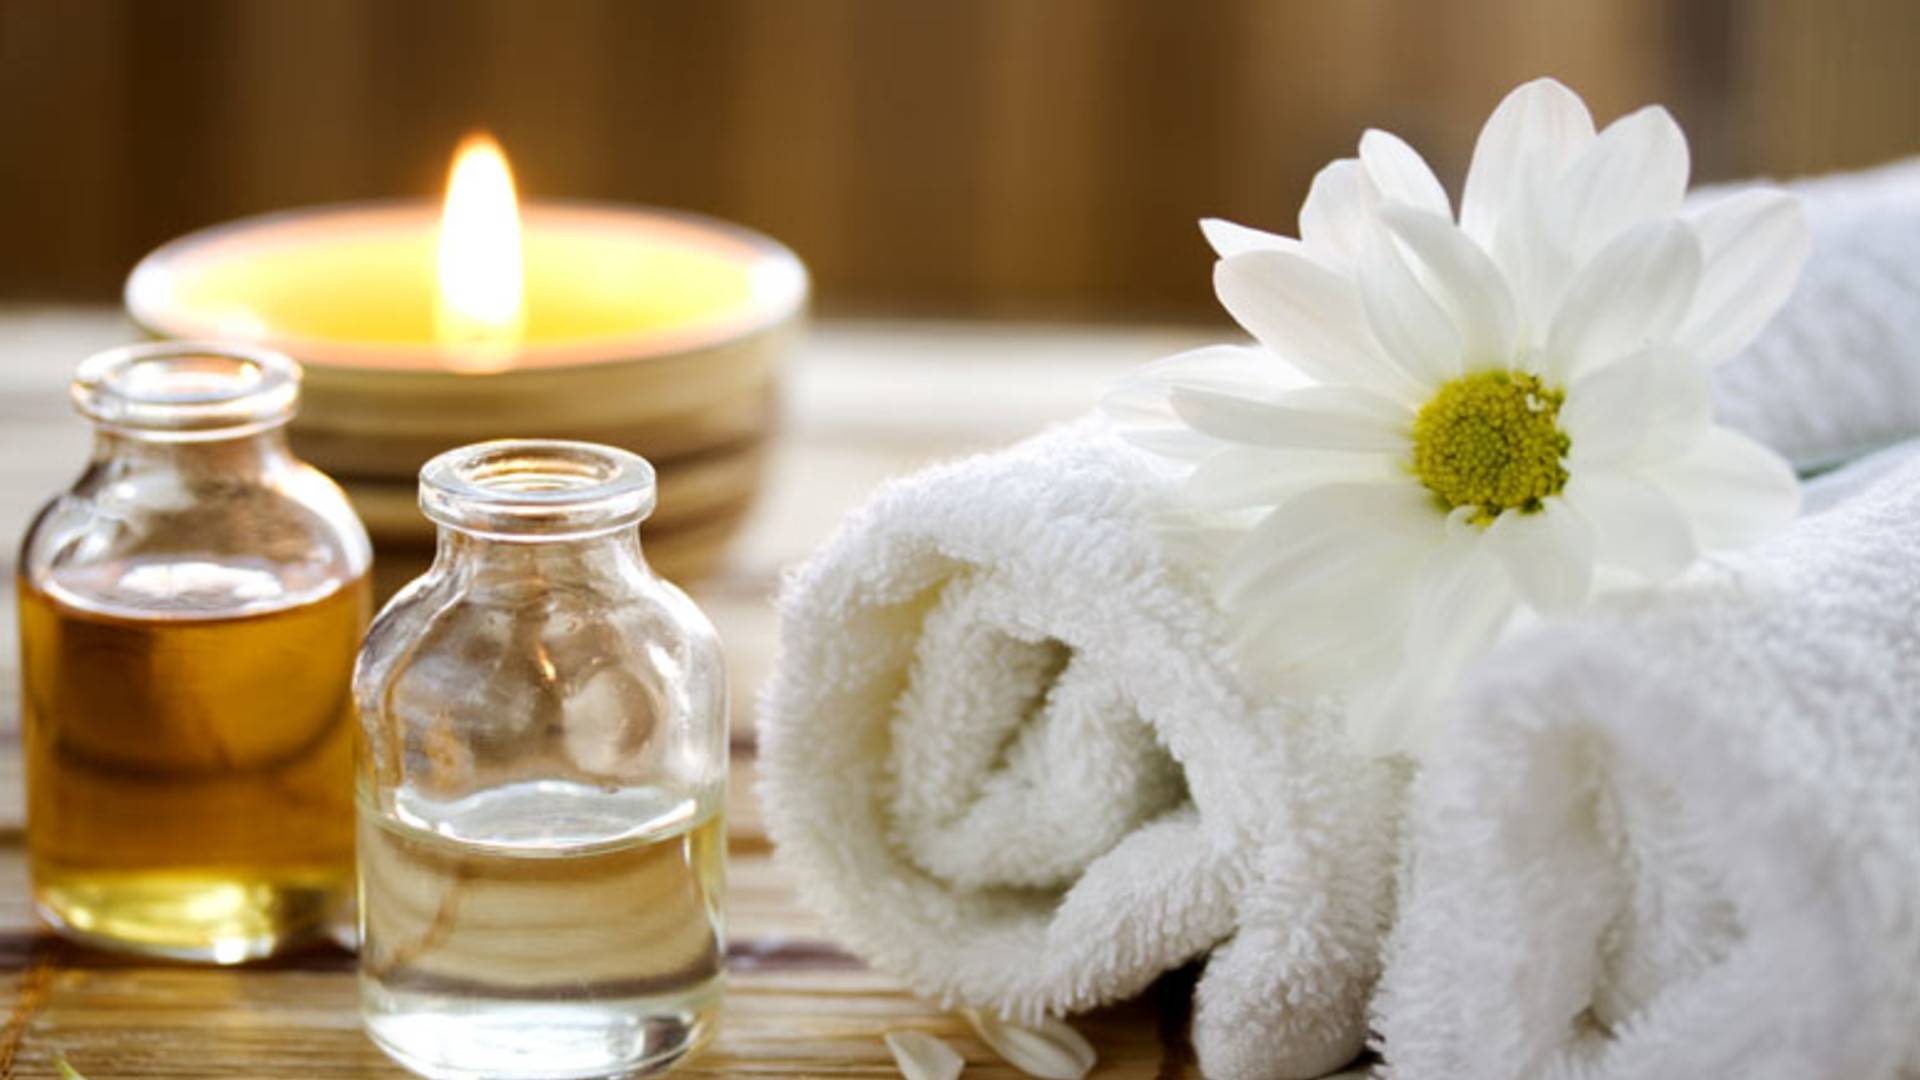 Spa essential oils and candle